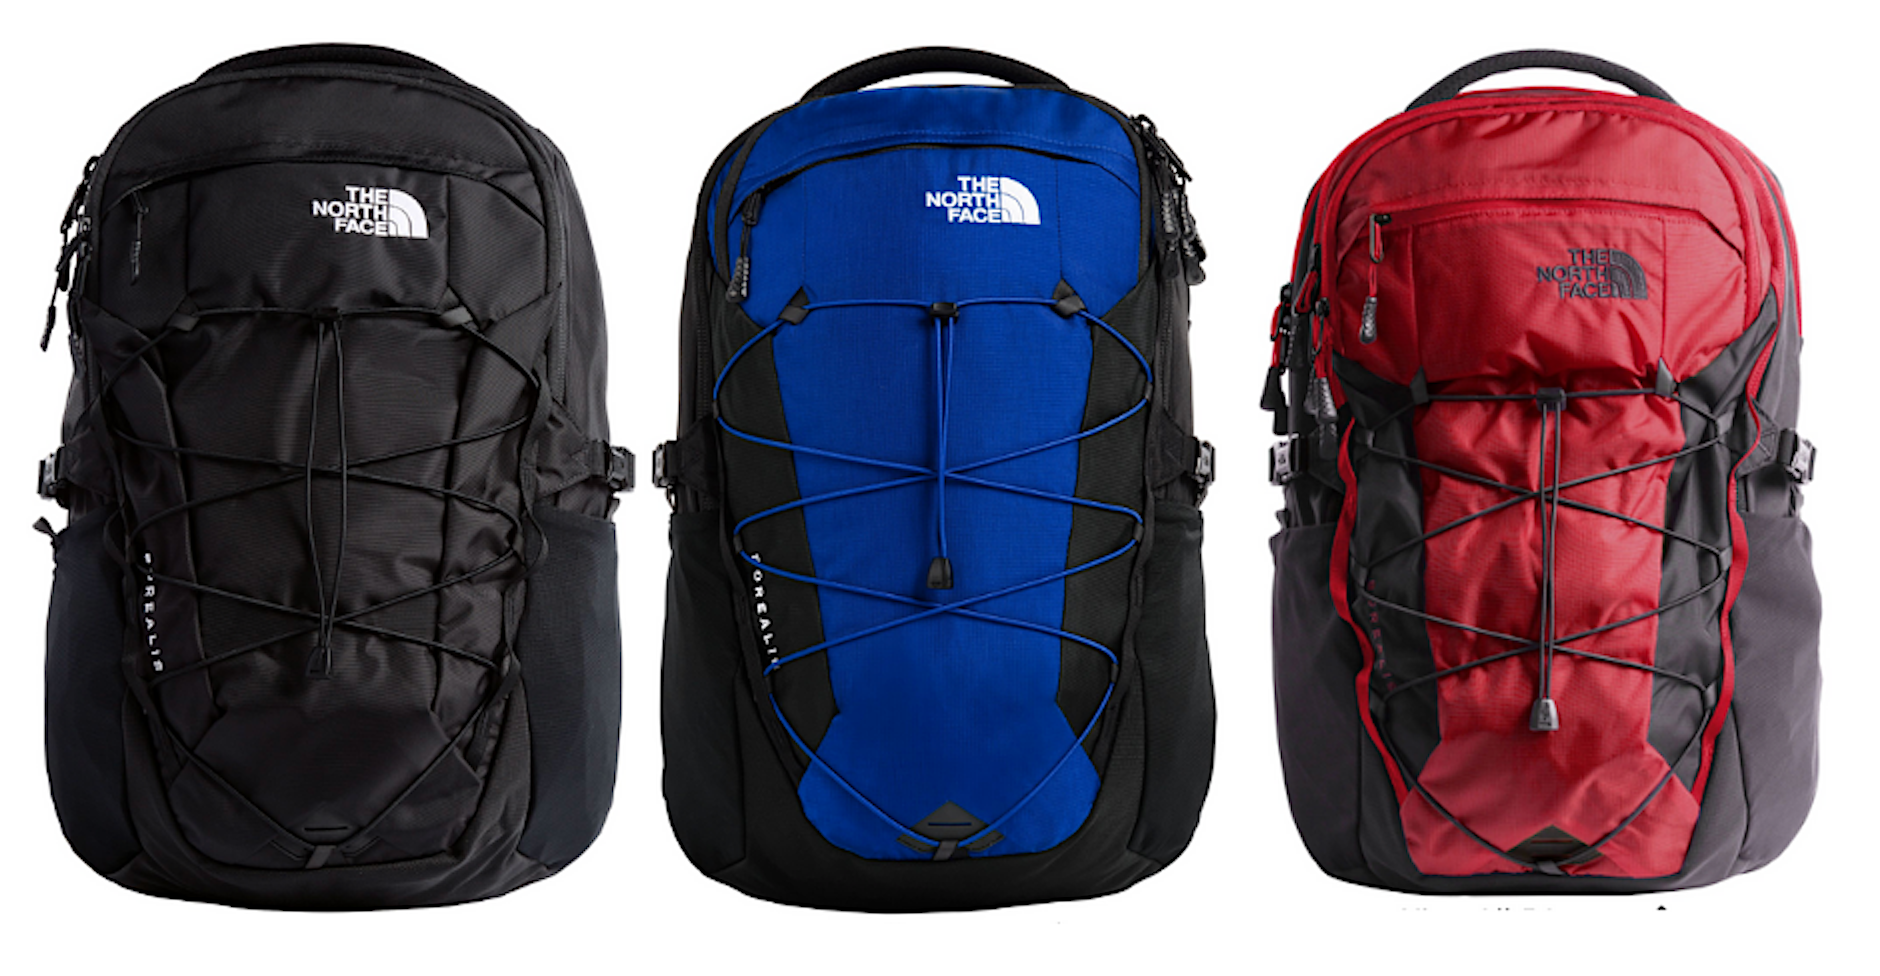 North Face Borealis Backpack Back To School Backpacks E1564145876233 ?auto=format&dpr=2&ixlib=php 3.3.0&q=100&sharp=20&s=795fe3b9db6af88630689a86f92a4fb1